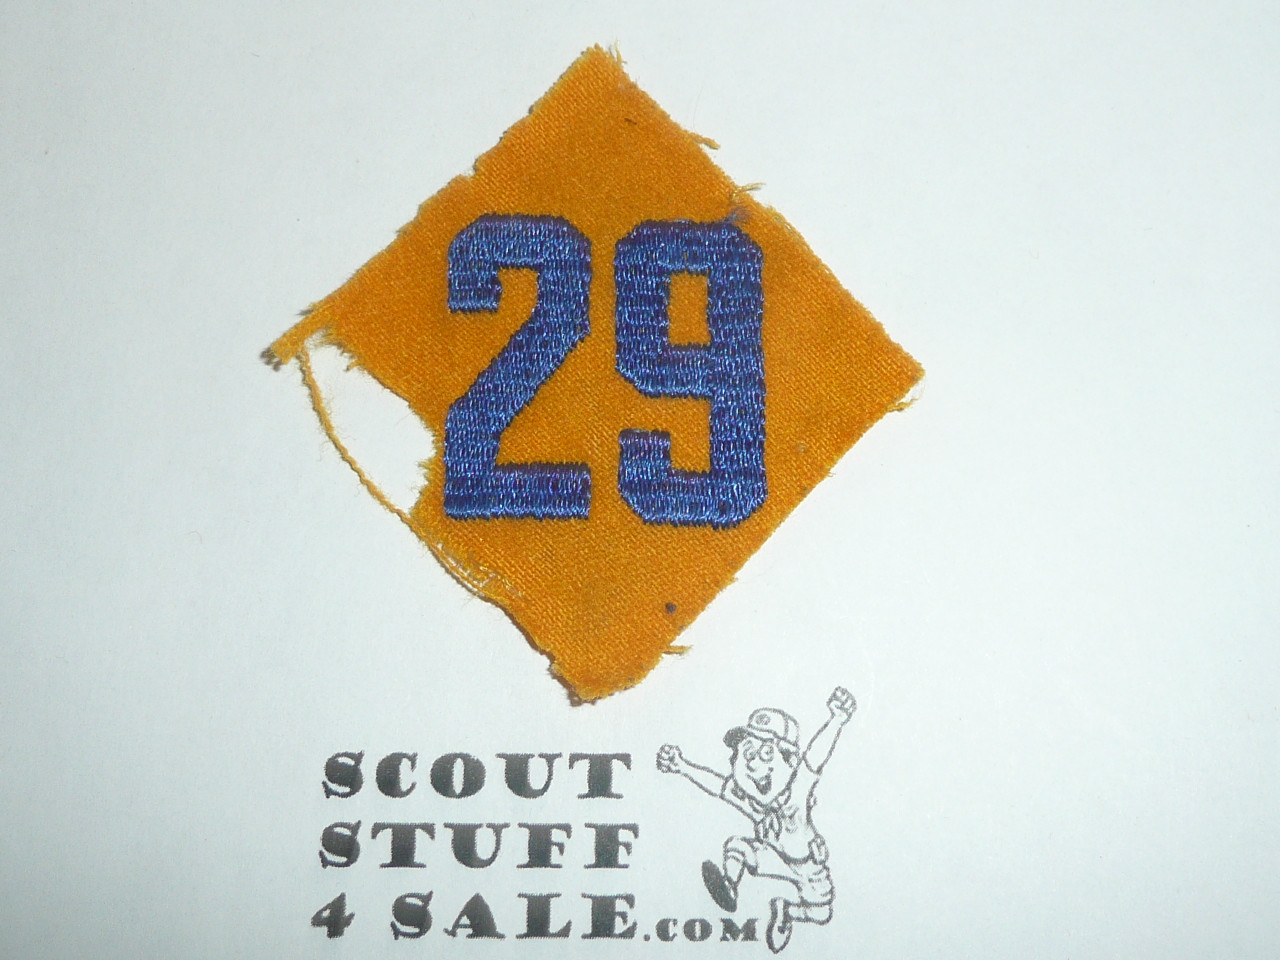 Old Felt Cub Scout Felt Diamond Unit Number 29 Patch, lite use with mothing